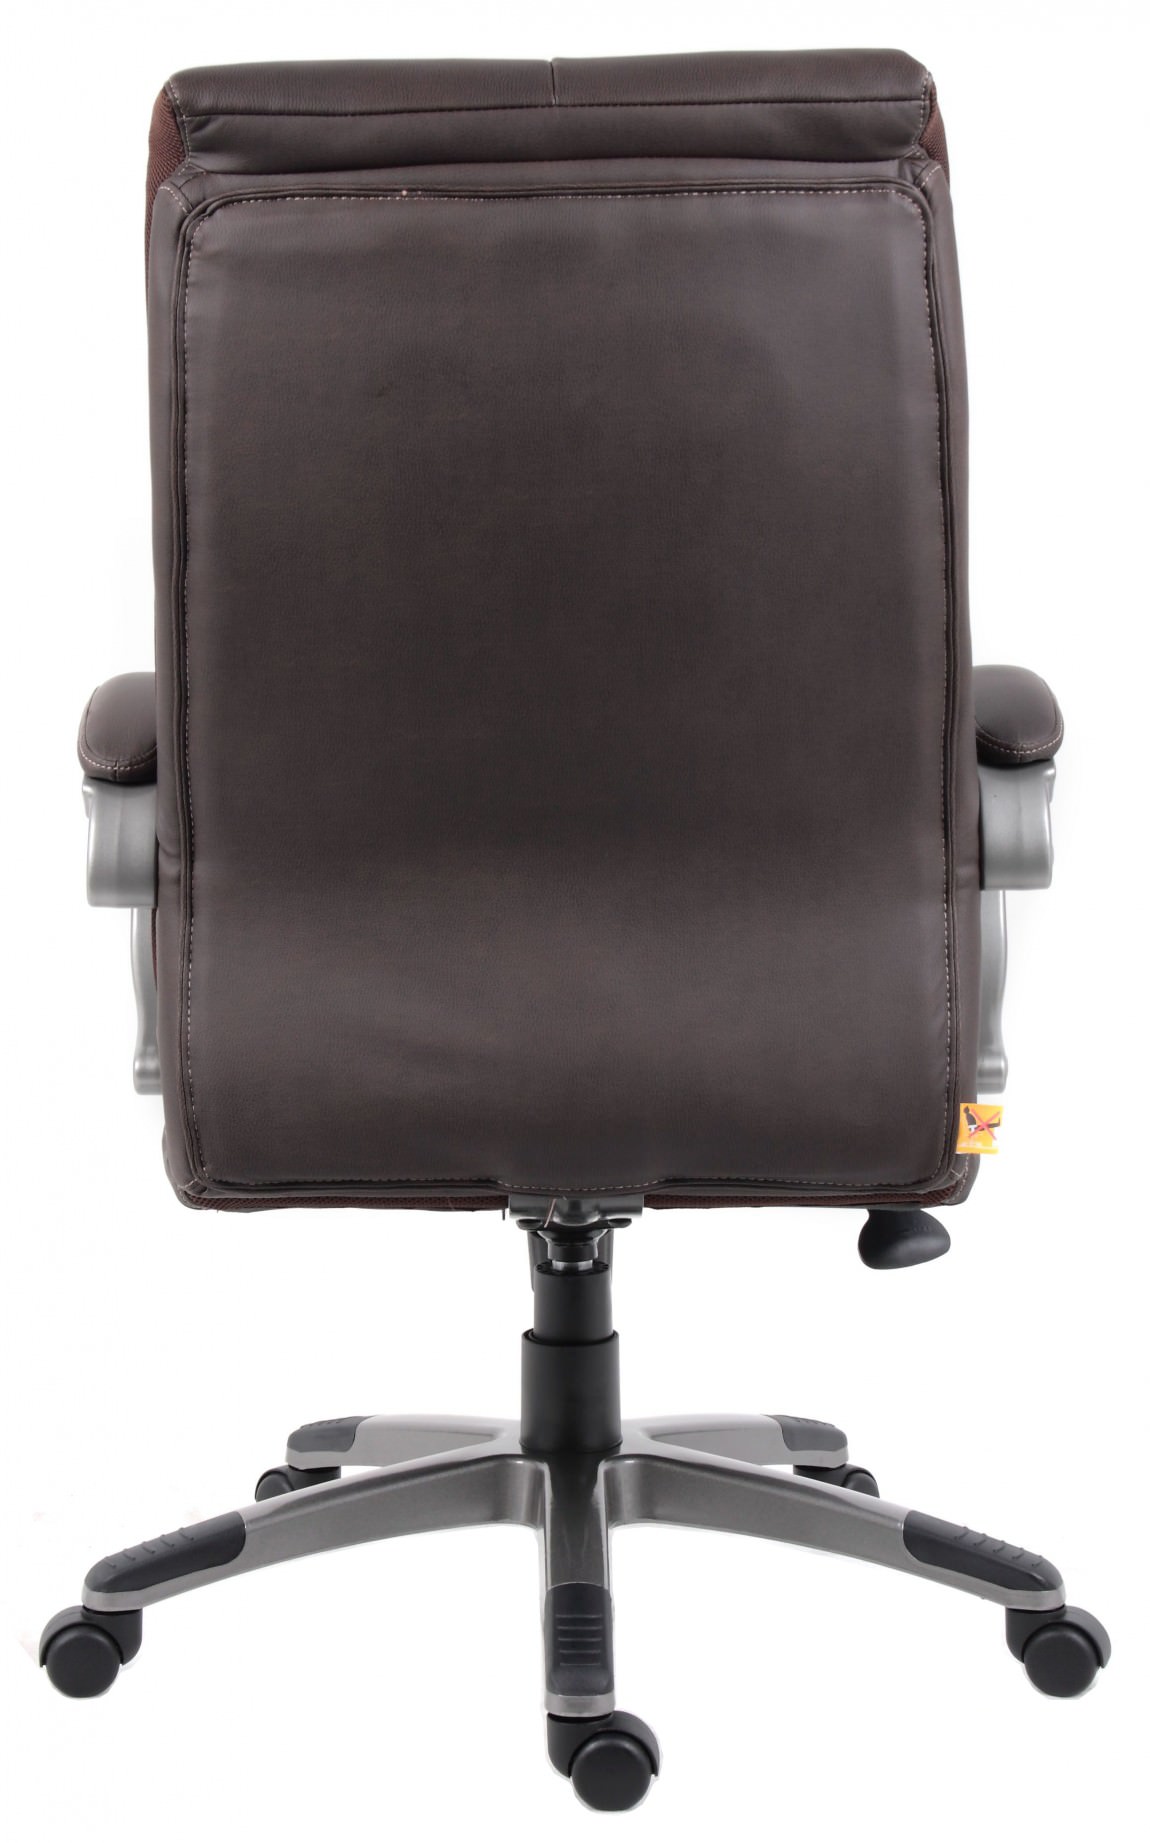 Brown Leather High Back Executive Chair